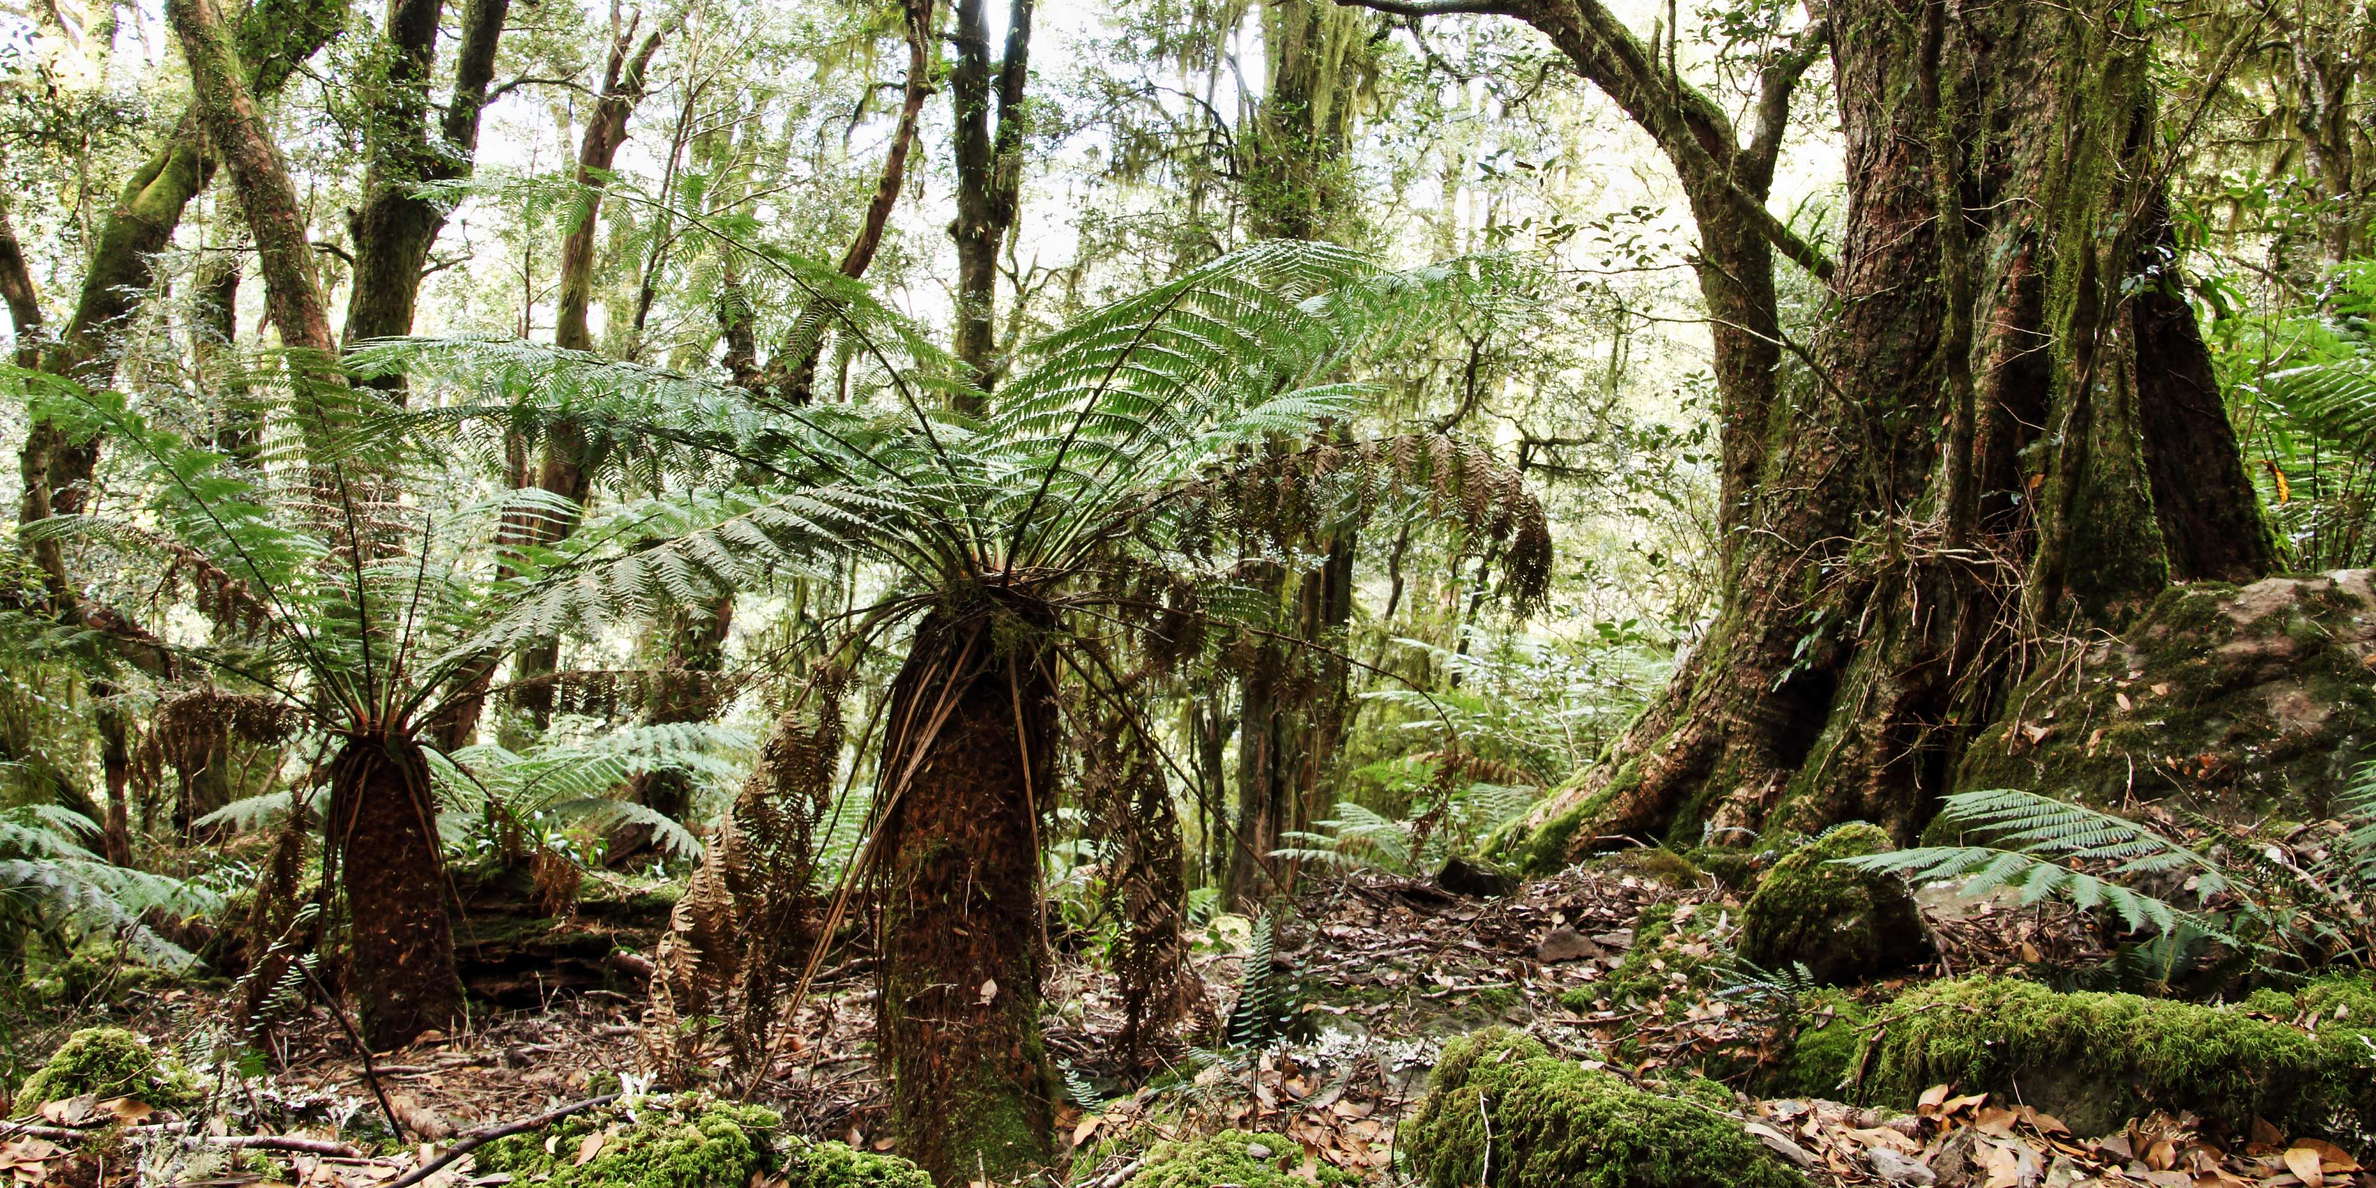 New England NP  |  Temperate rainforest with tree ferns